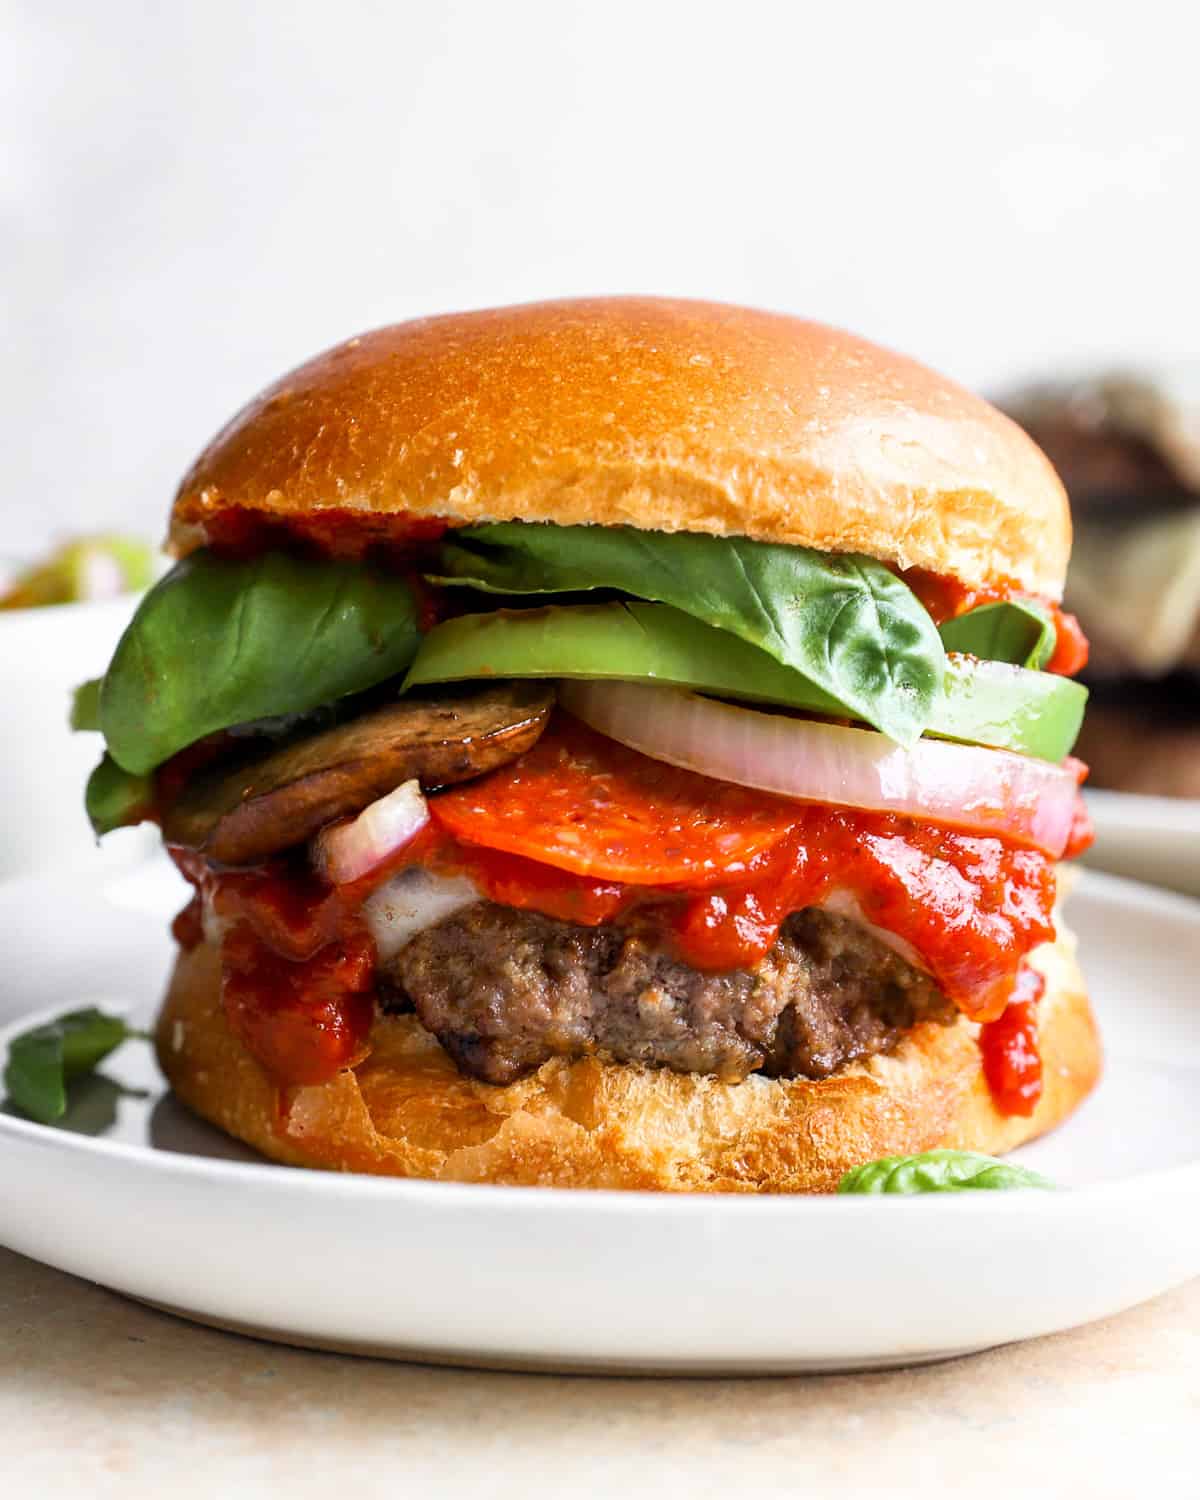 a pizza burger on a plate with tomatoes, lettuce, and other toppings.